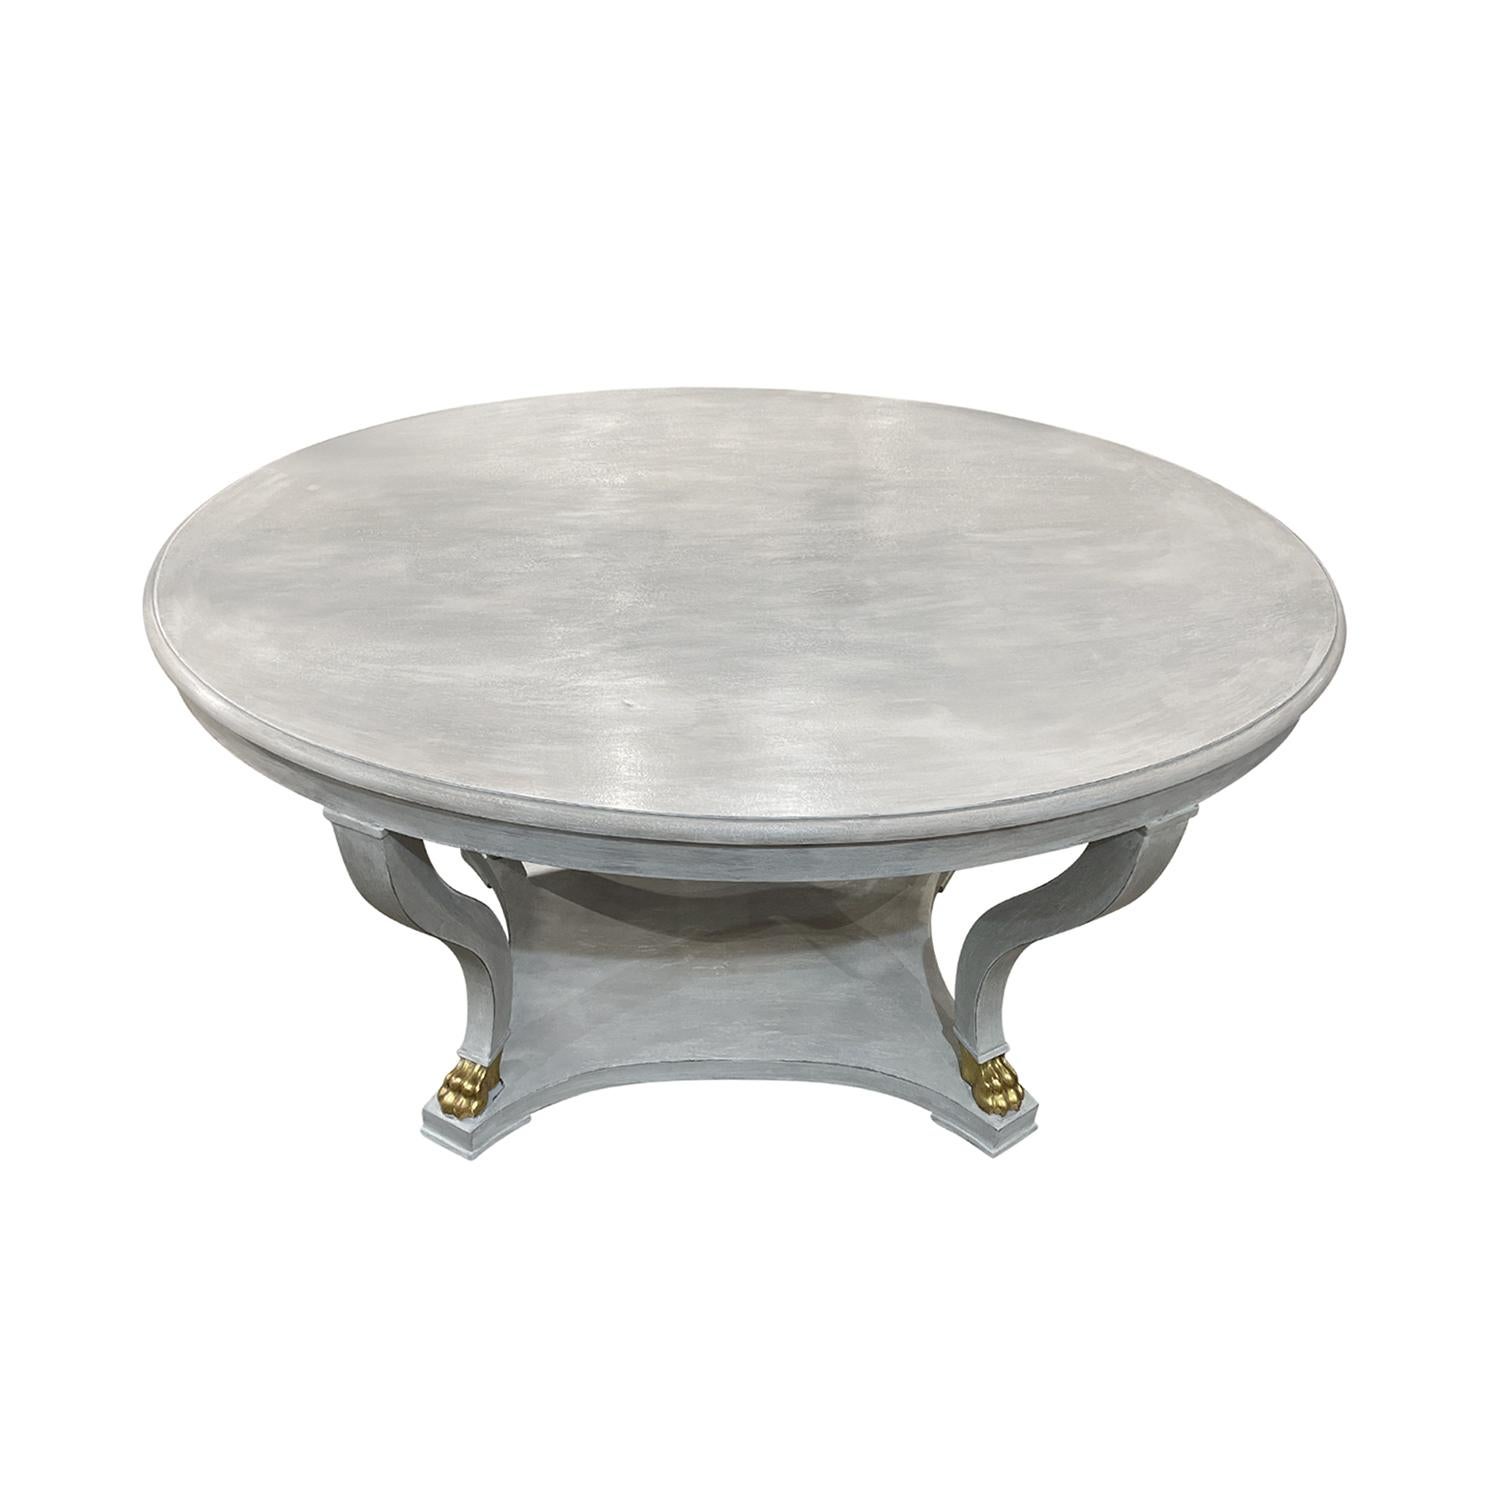 19th Century Light-Grey Swedish Gustavian Antique Oval Pine Dining Room Table In Good Condition For Sale In West Palm Beach, FL